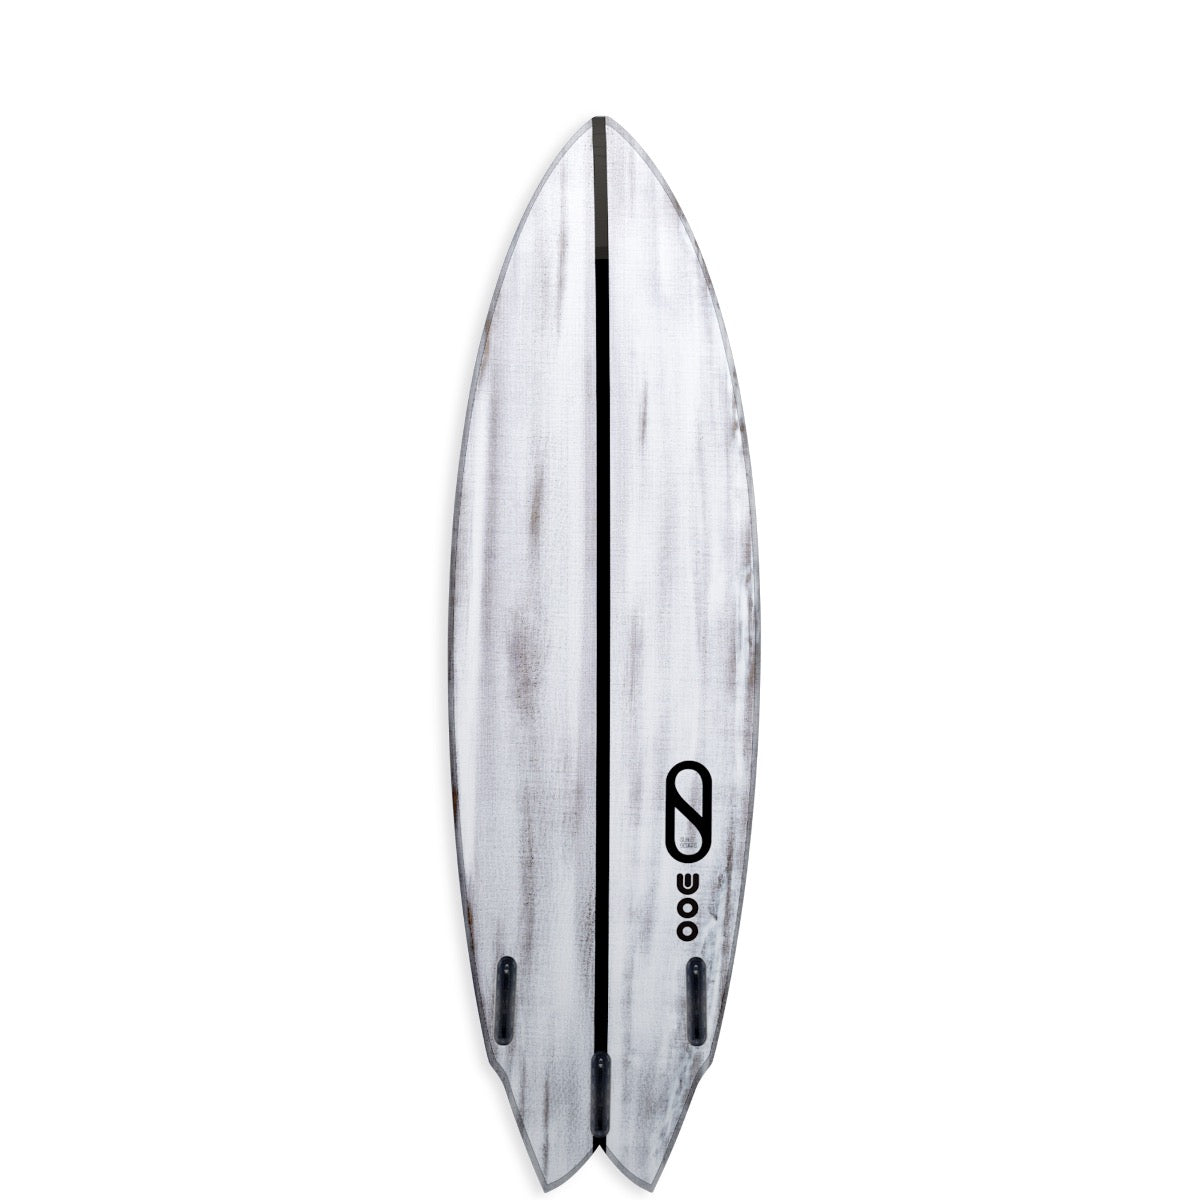 Slater Designs Great White Twin by Kelly Slater and Mike Woo